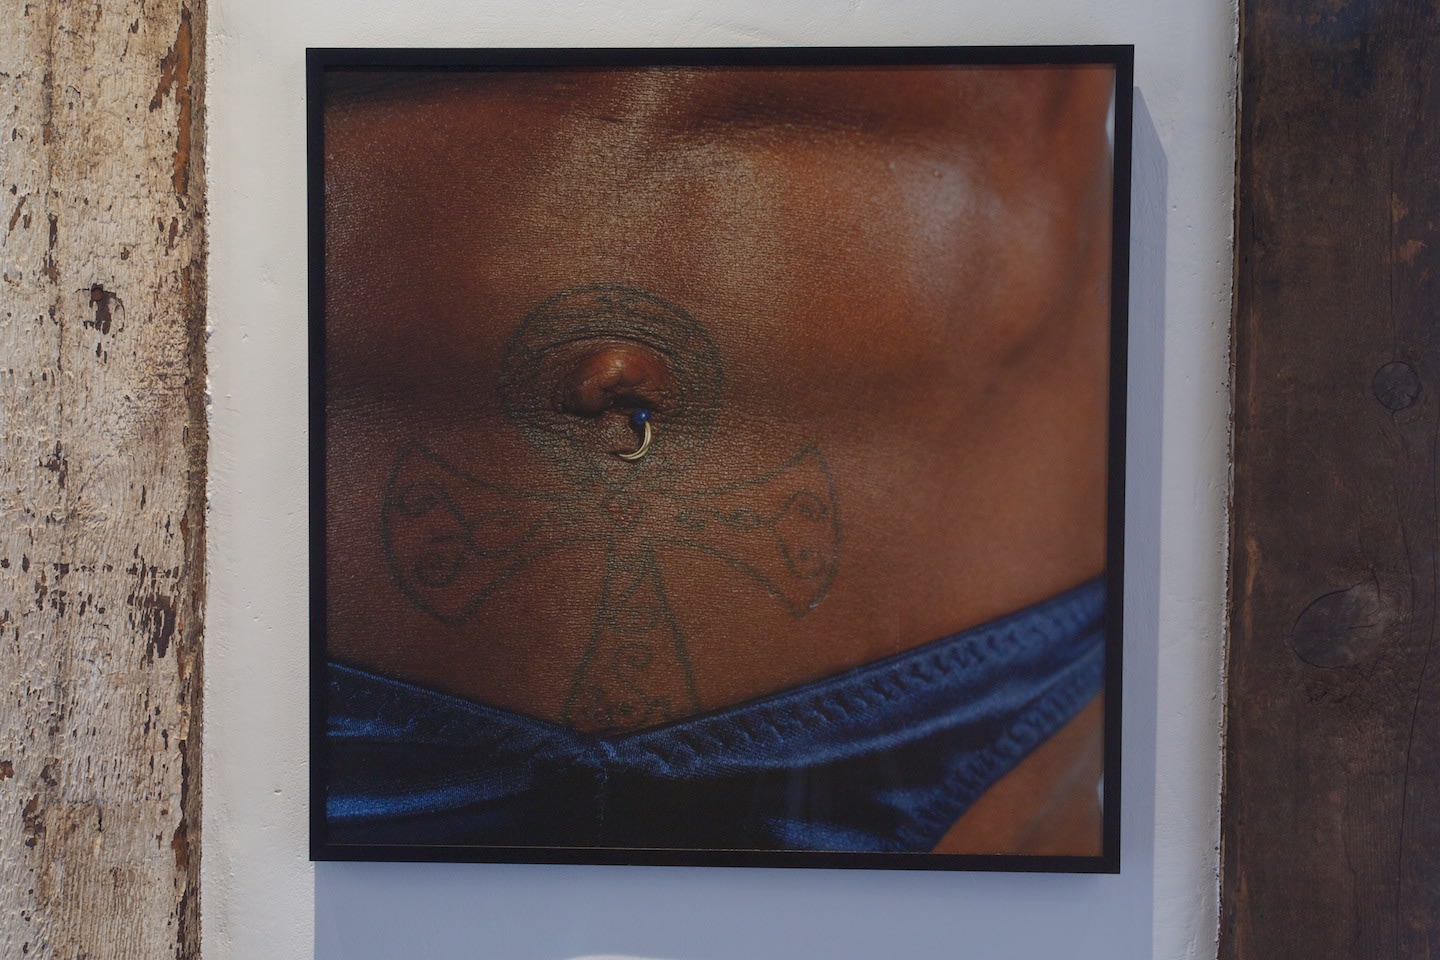 Deborah Willis
Washboard Stomach, The Bodybuilders series, 2000
Archival inkjet print
20 x 20 inches framed
Courtesy of the Artist and Fort Gansevoort